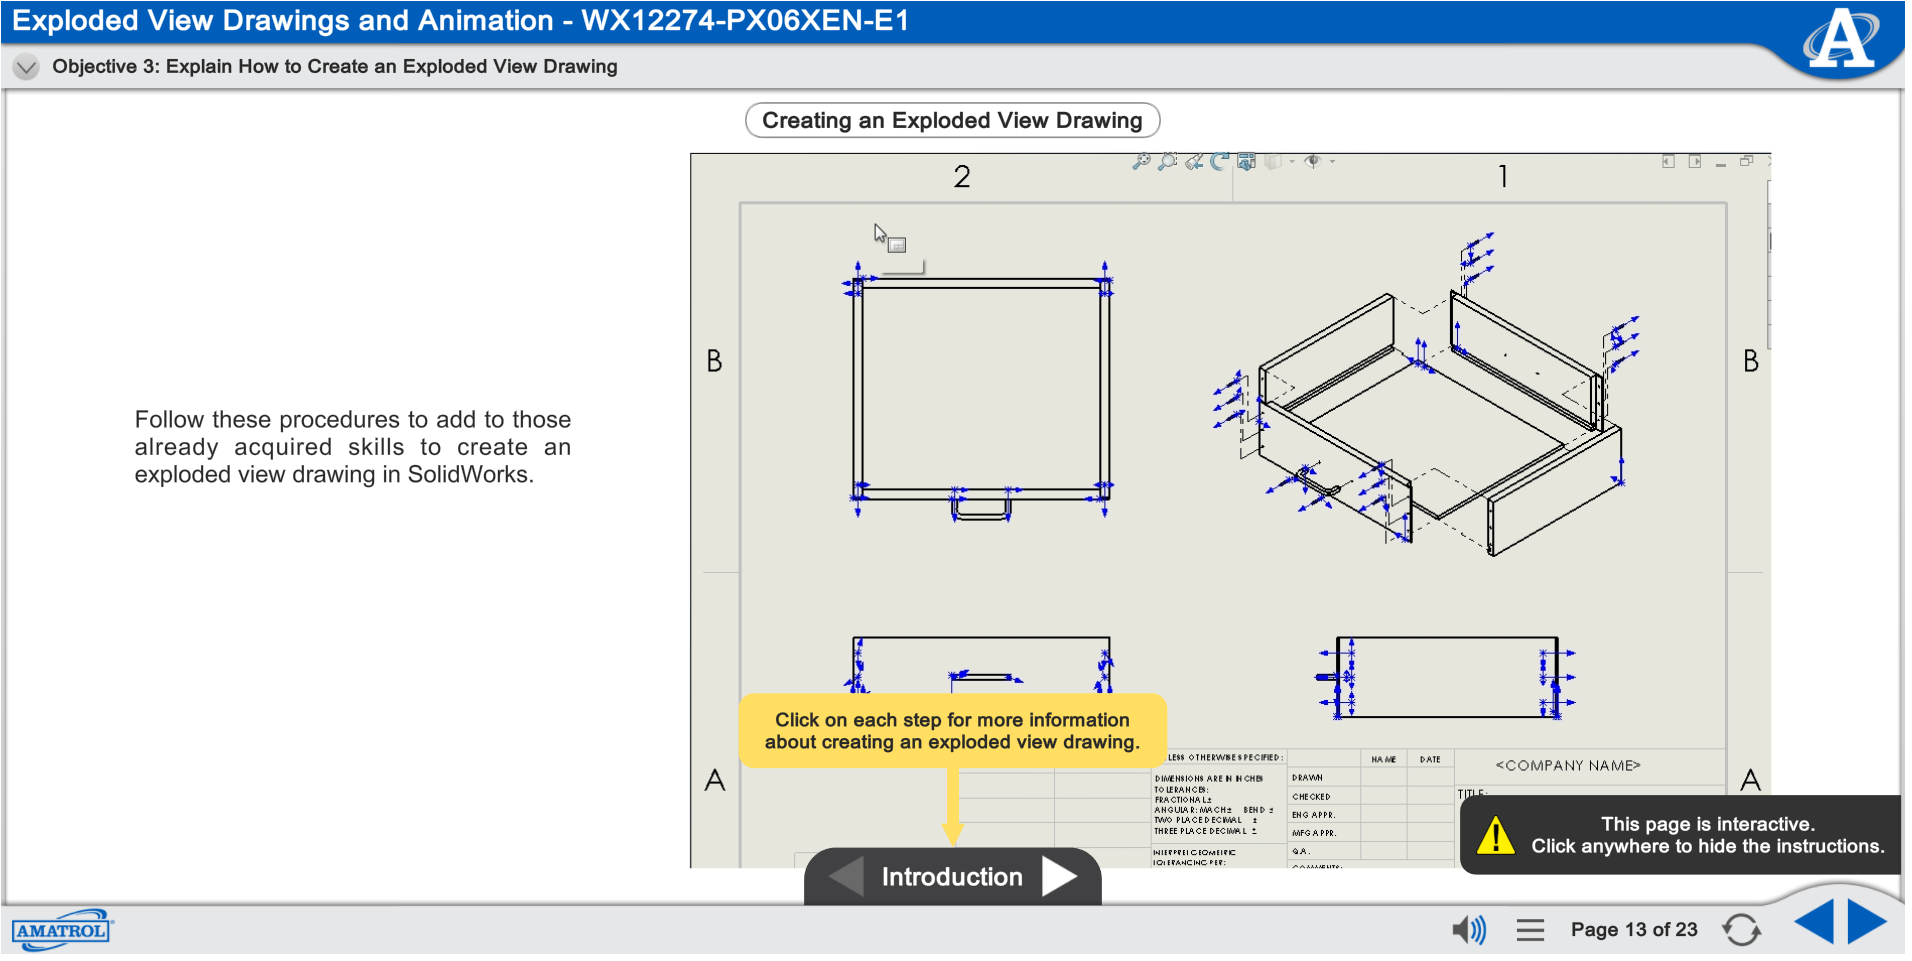 Exploded View Drawings and Animation Interactive eLearning